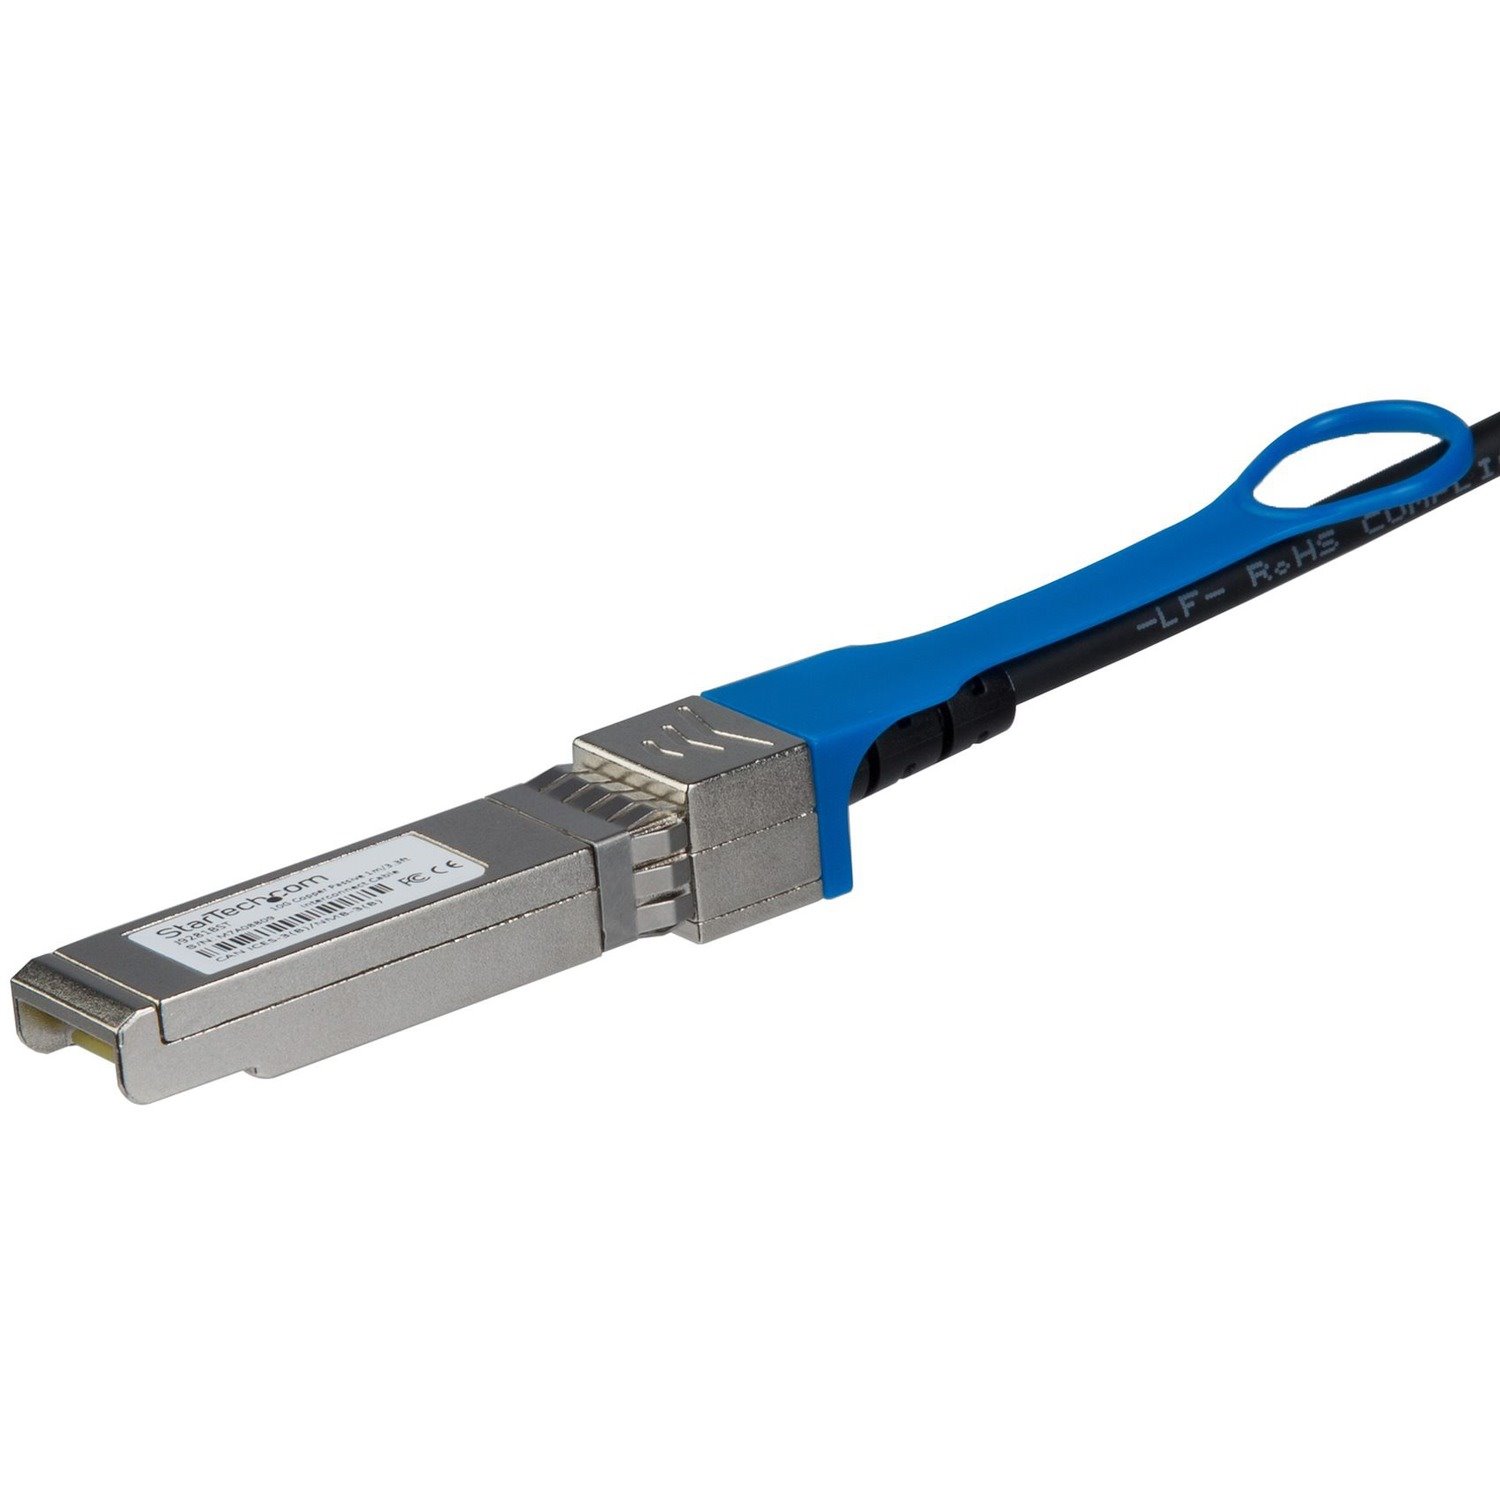 StarTech.com 7m 10G SFP+ to SFP+ Direct Attach Cable for HPE J9285B - 10GbE SFP+ Copper DAC 10 Gbps Low Power Passive Twinax